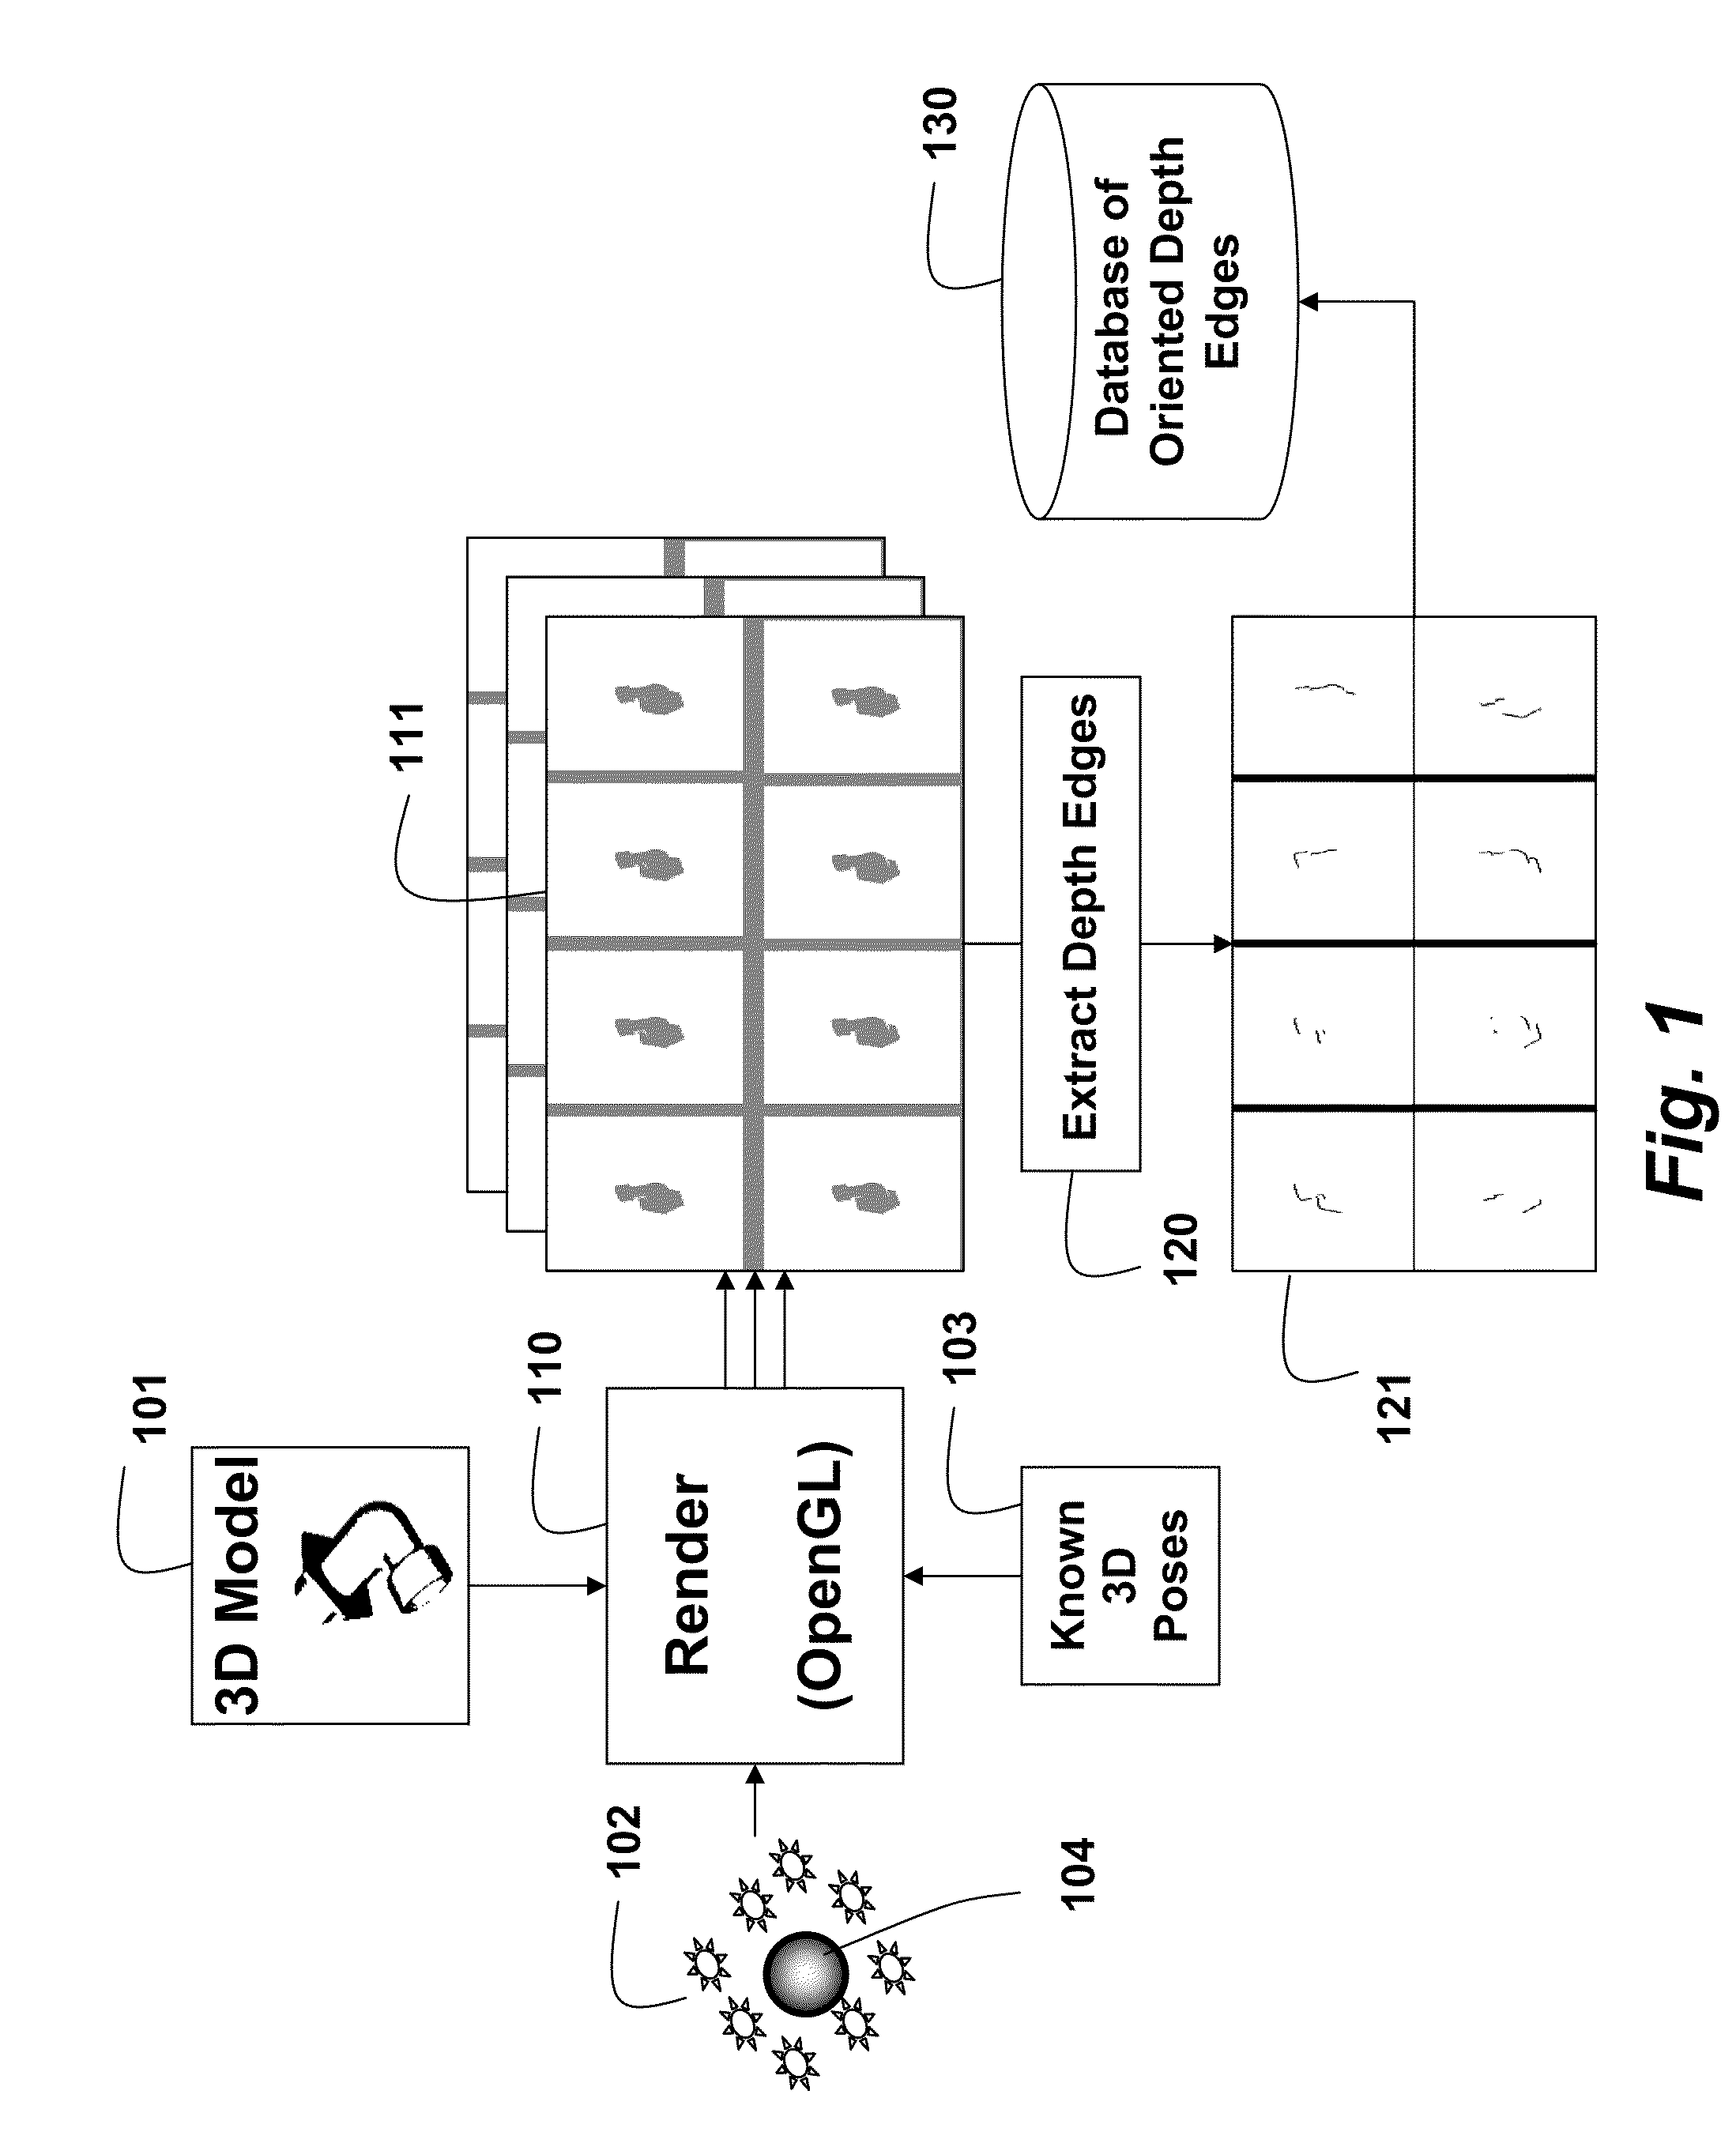 System and Method for Determining Poses of Objects